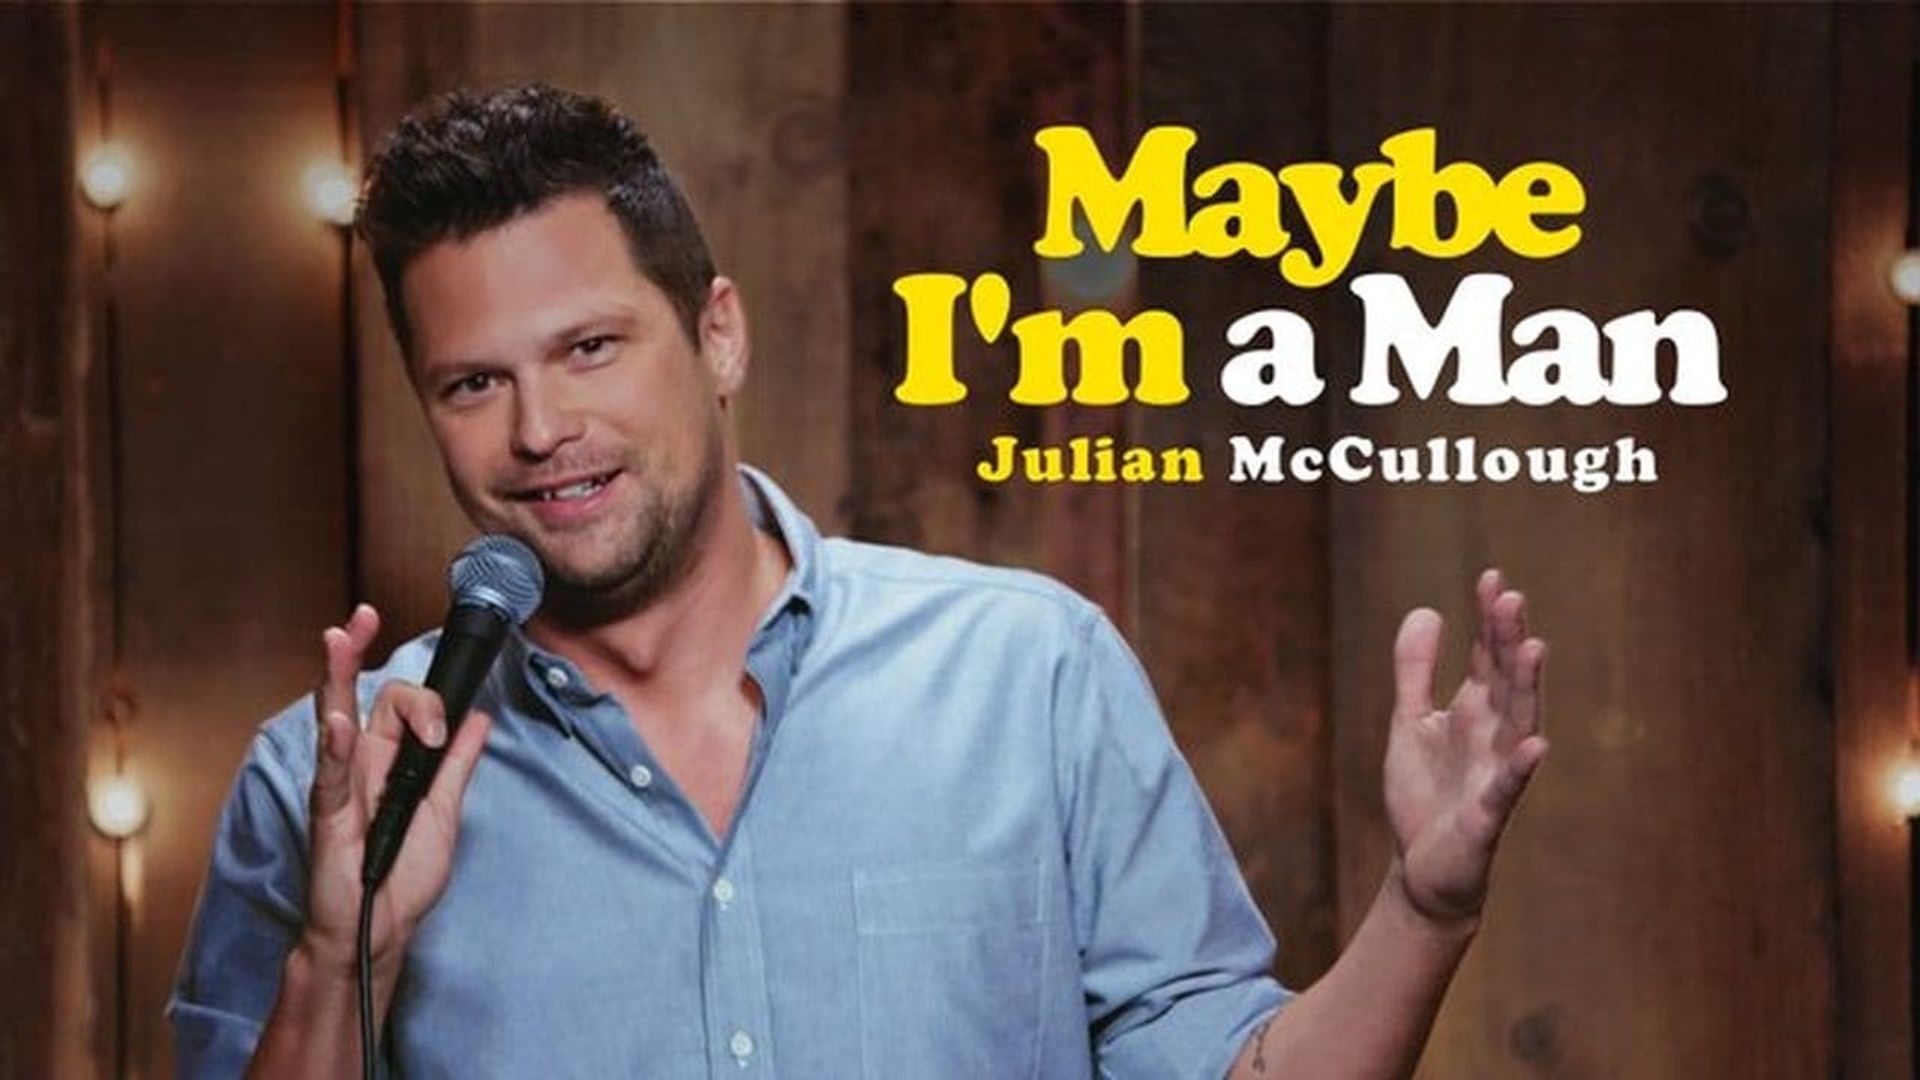 Julian McCullough: Maybe I'm a Man background